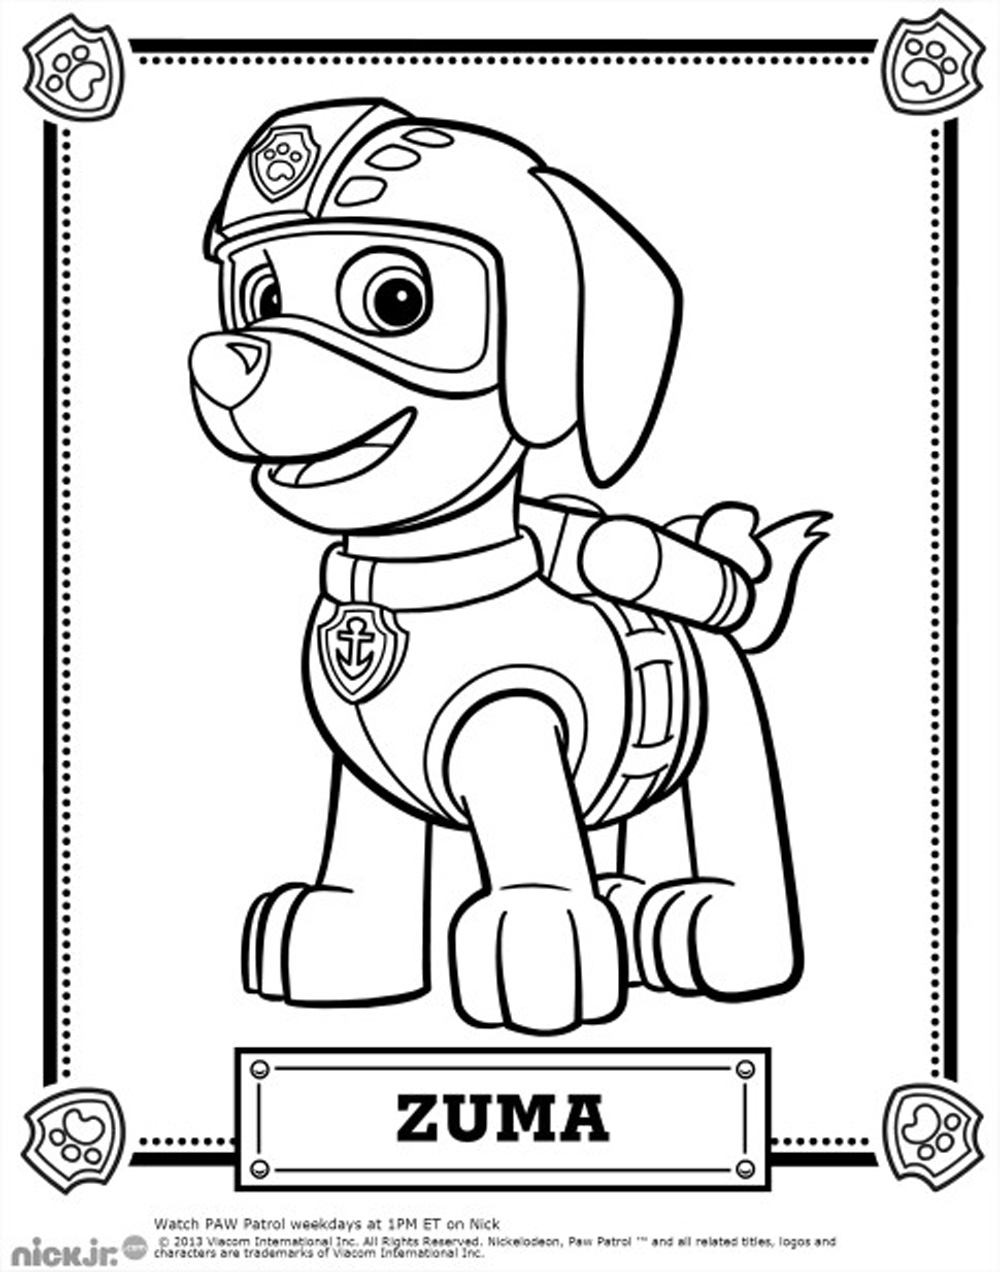 Paw patrol for children - Paw Patrol Kids Coloring Pages